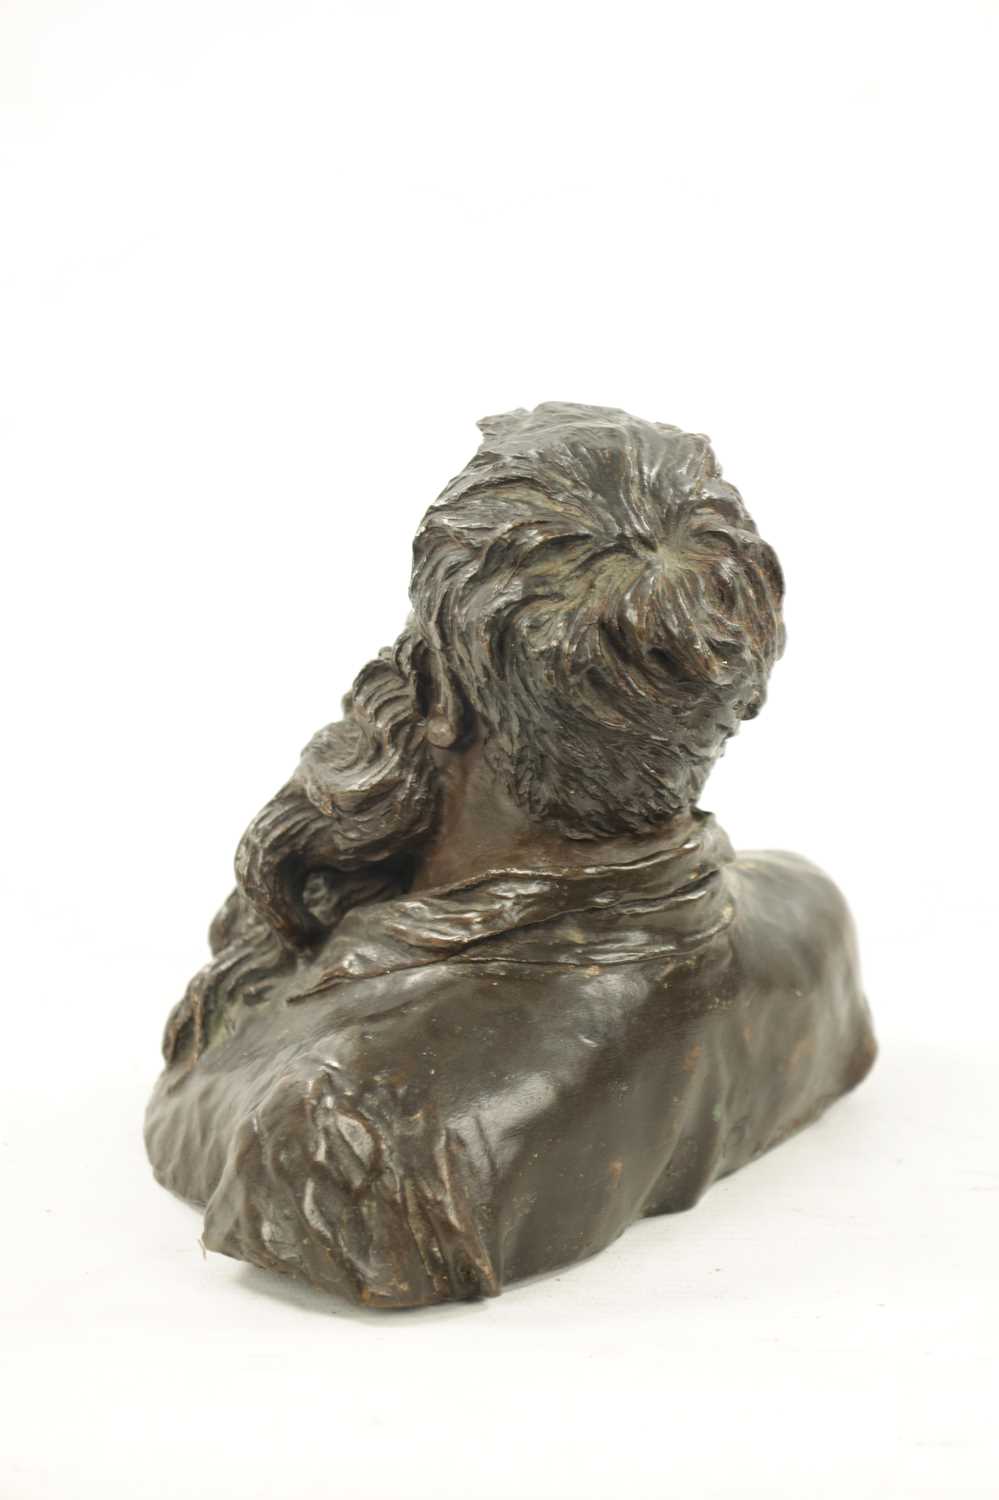 VINCENZO GEMITO (1852-1929). A LATE 19TH CENTURY PATINATED BRONZE BUST - Image 4 of 8